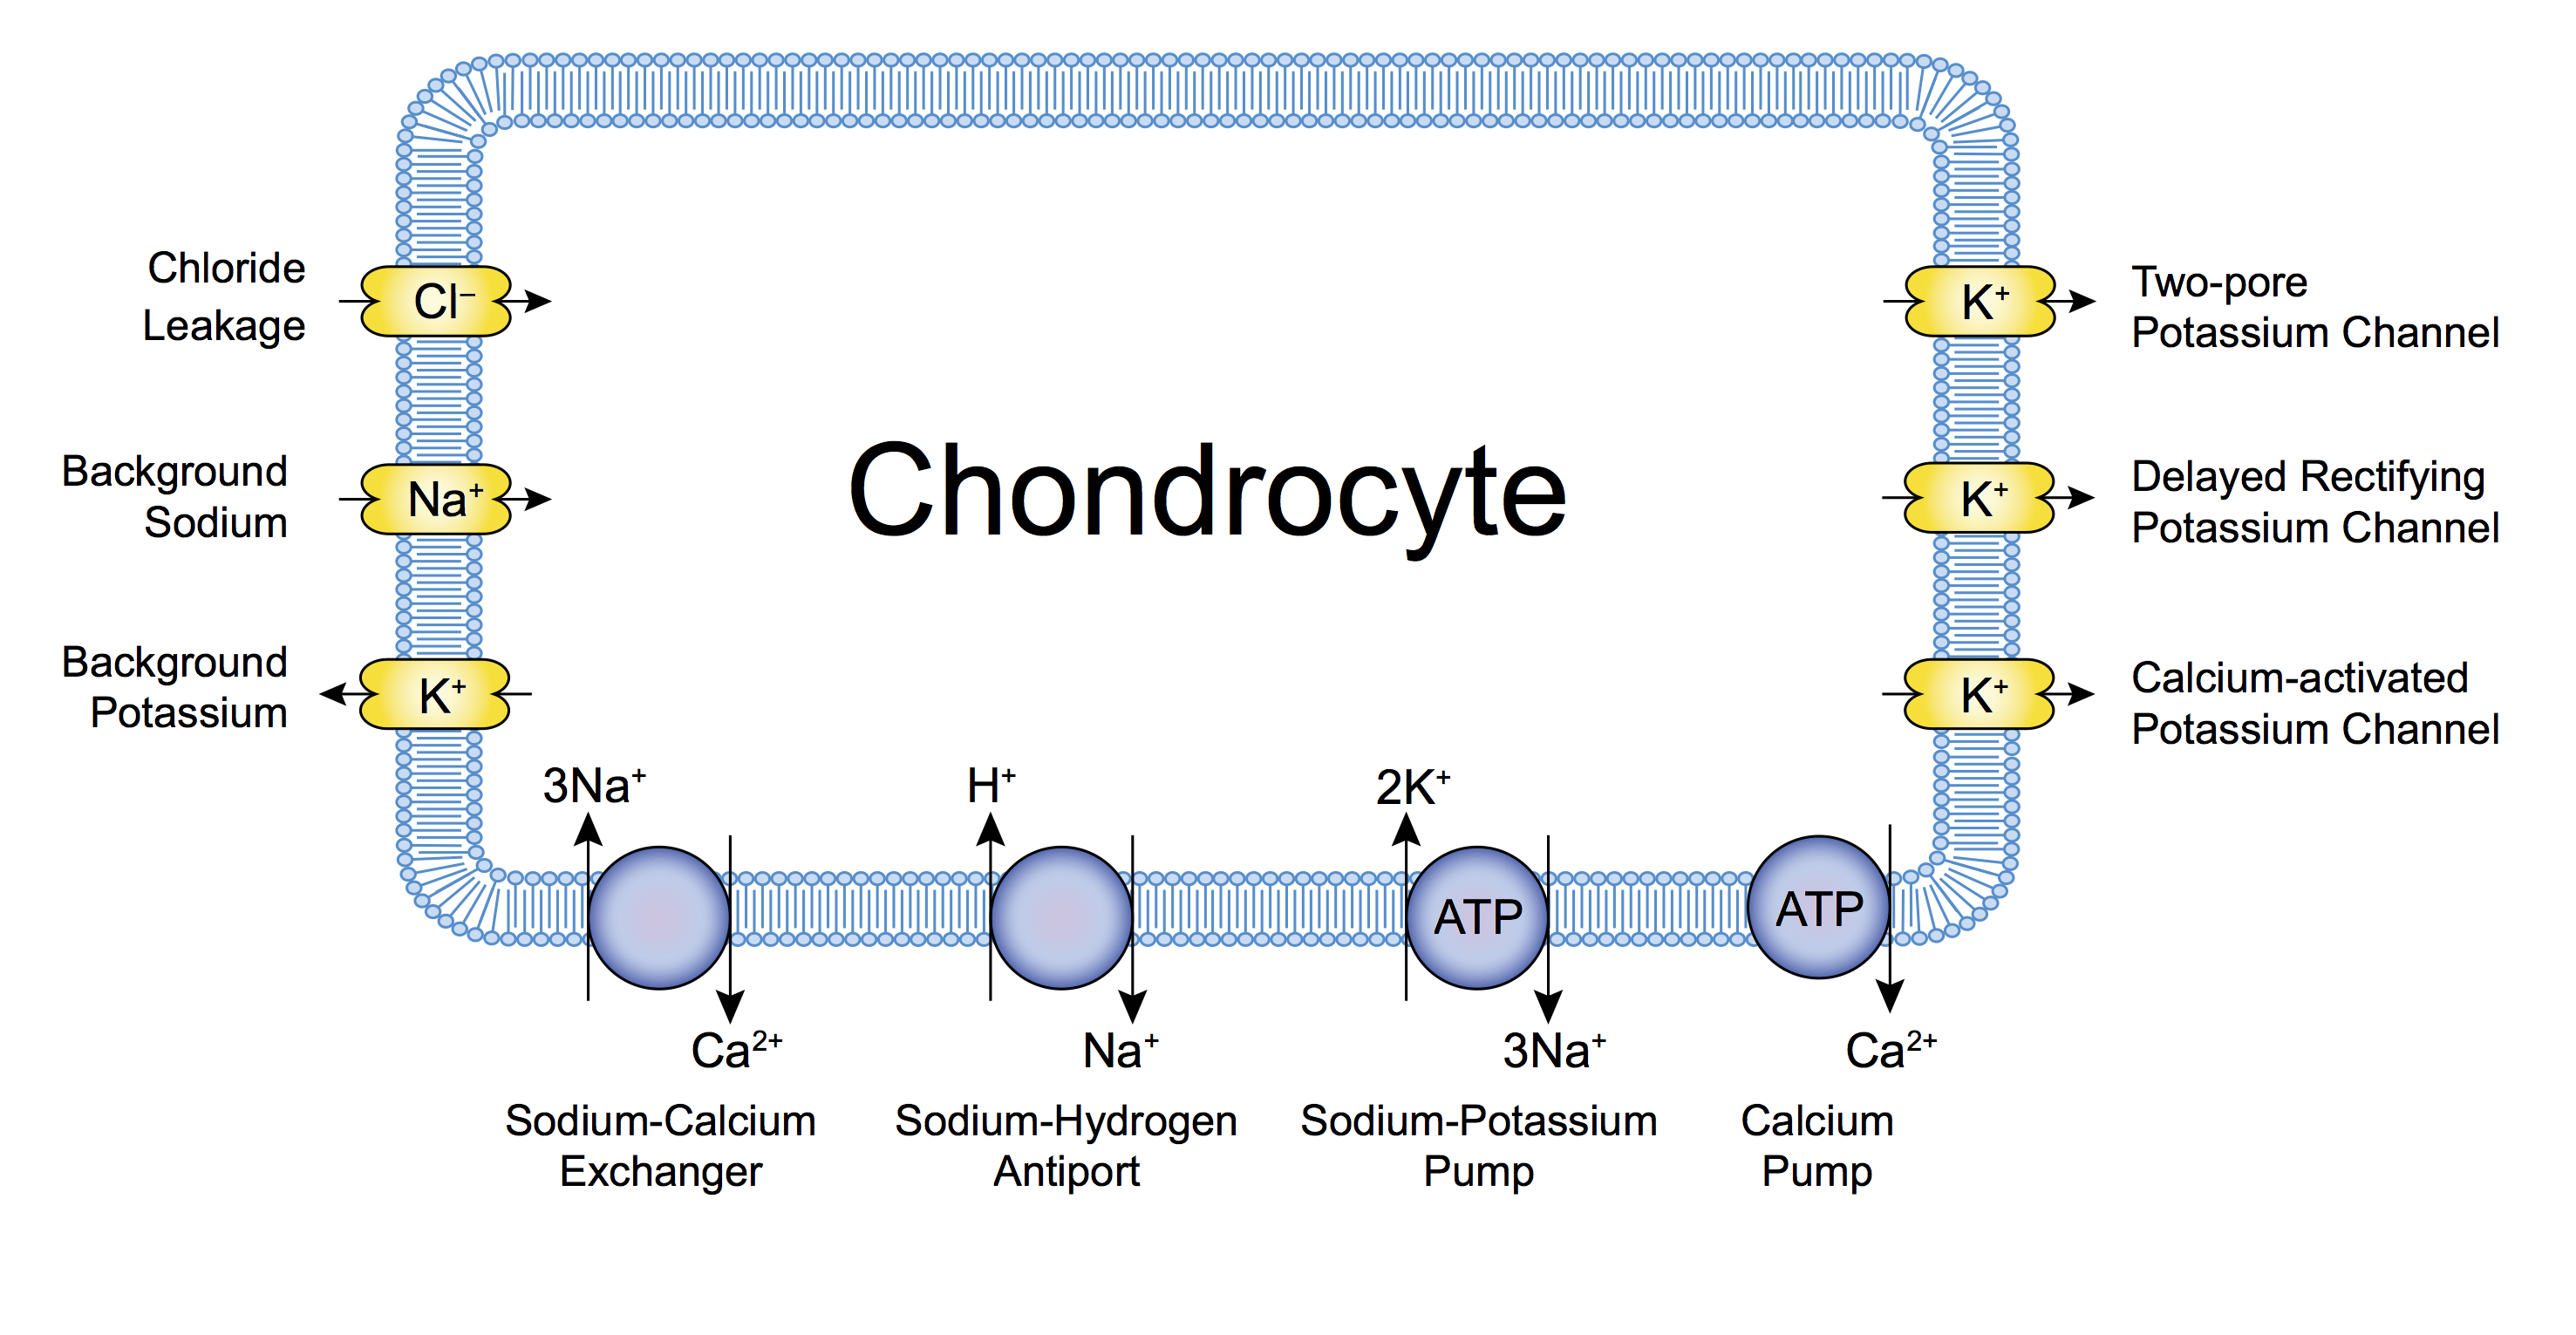 A schematic of the ion channels in a single chondrocyte.